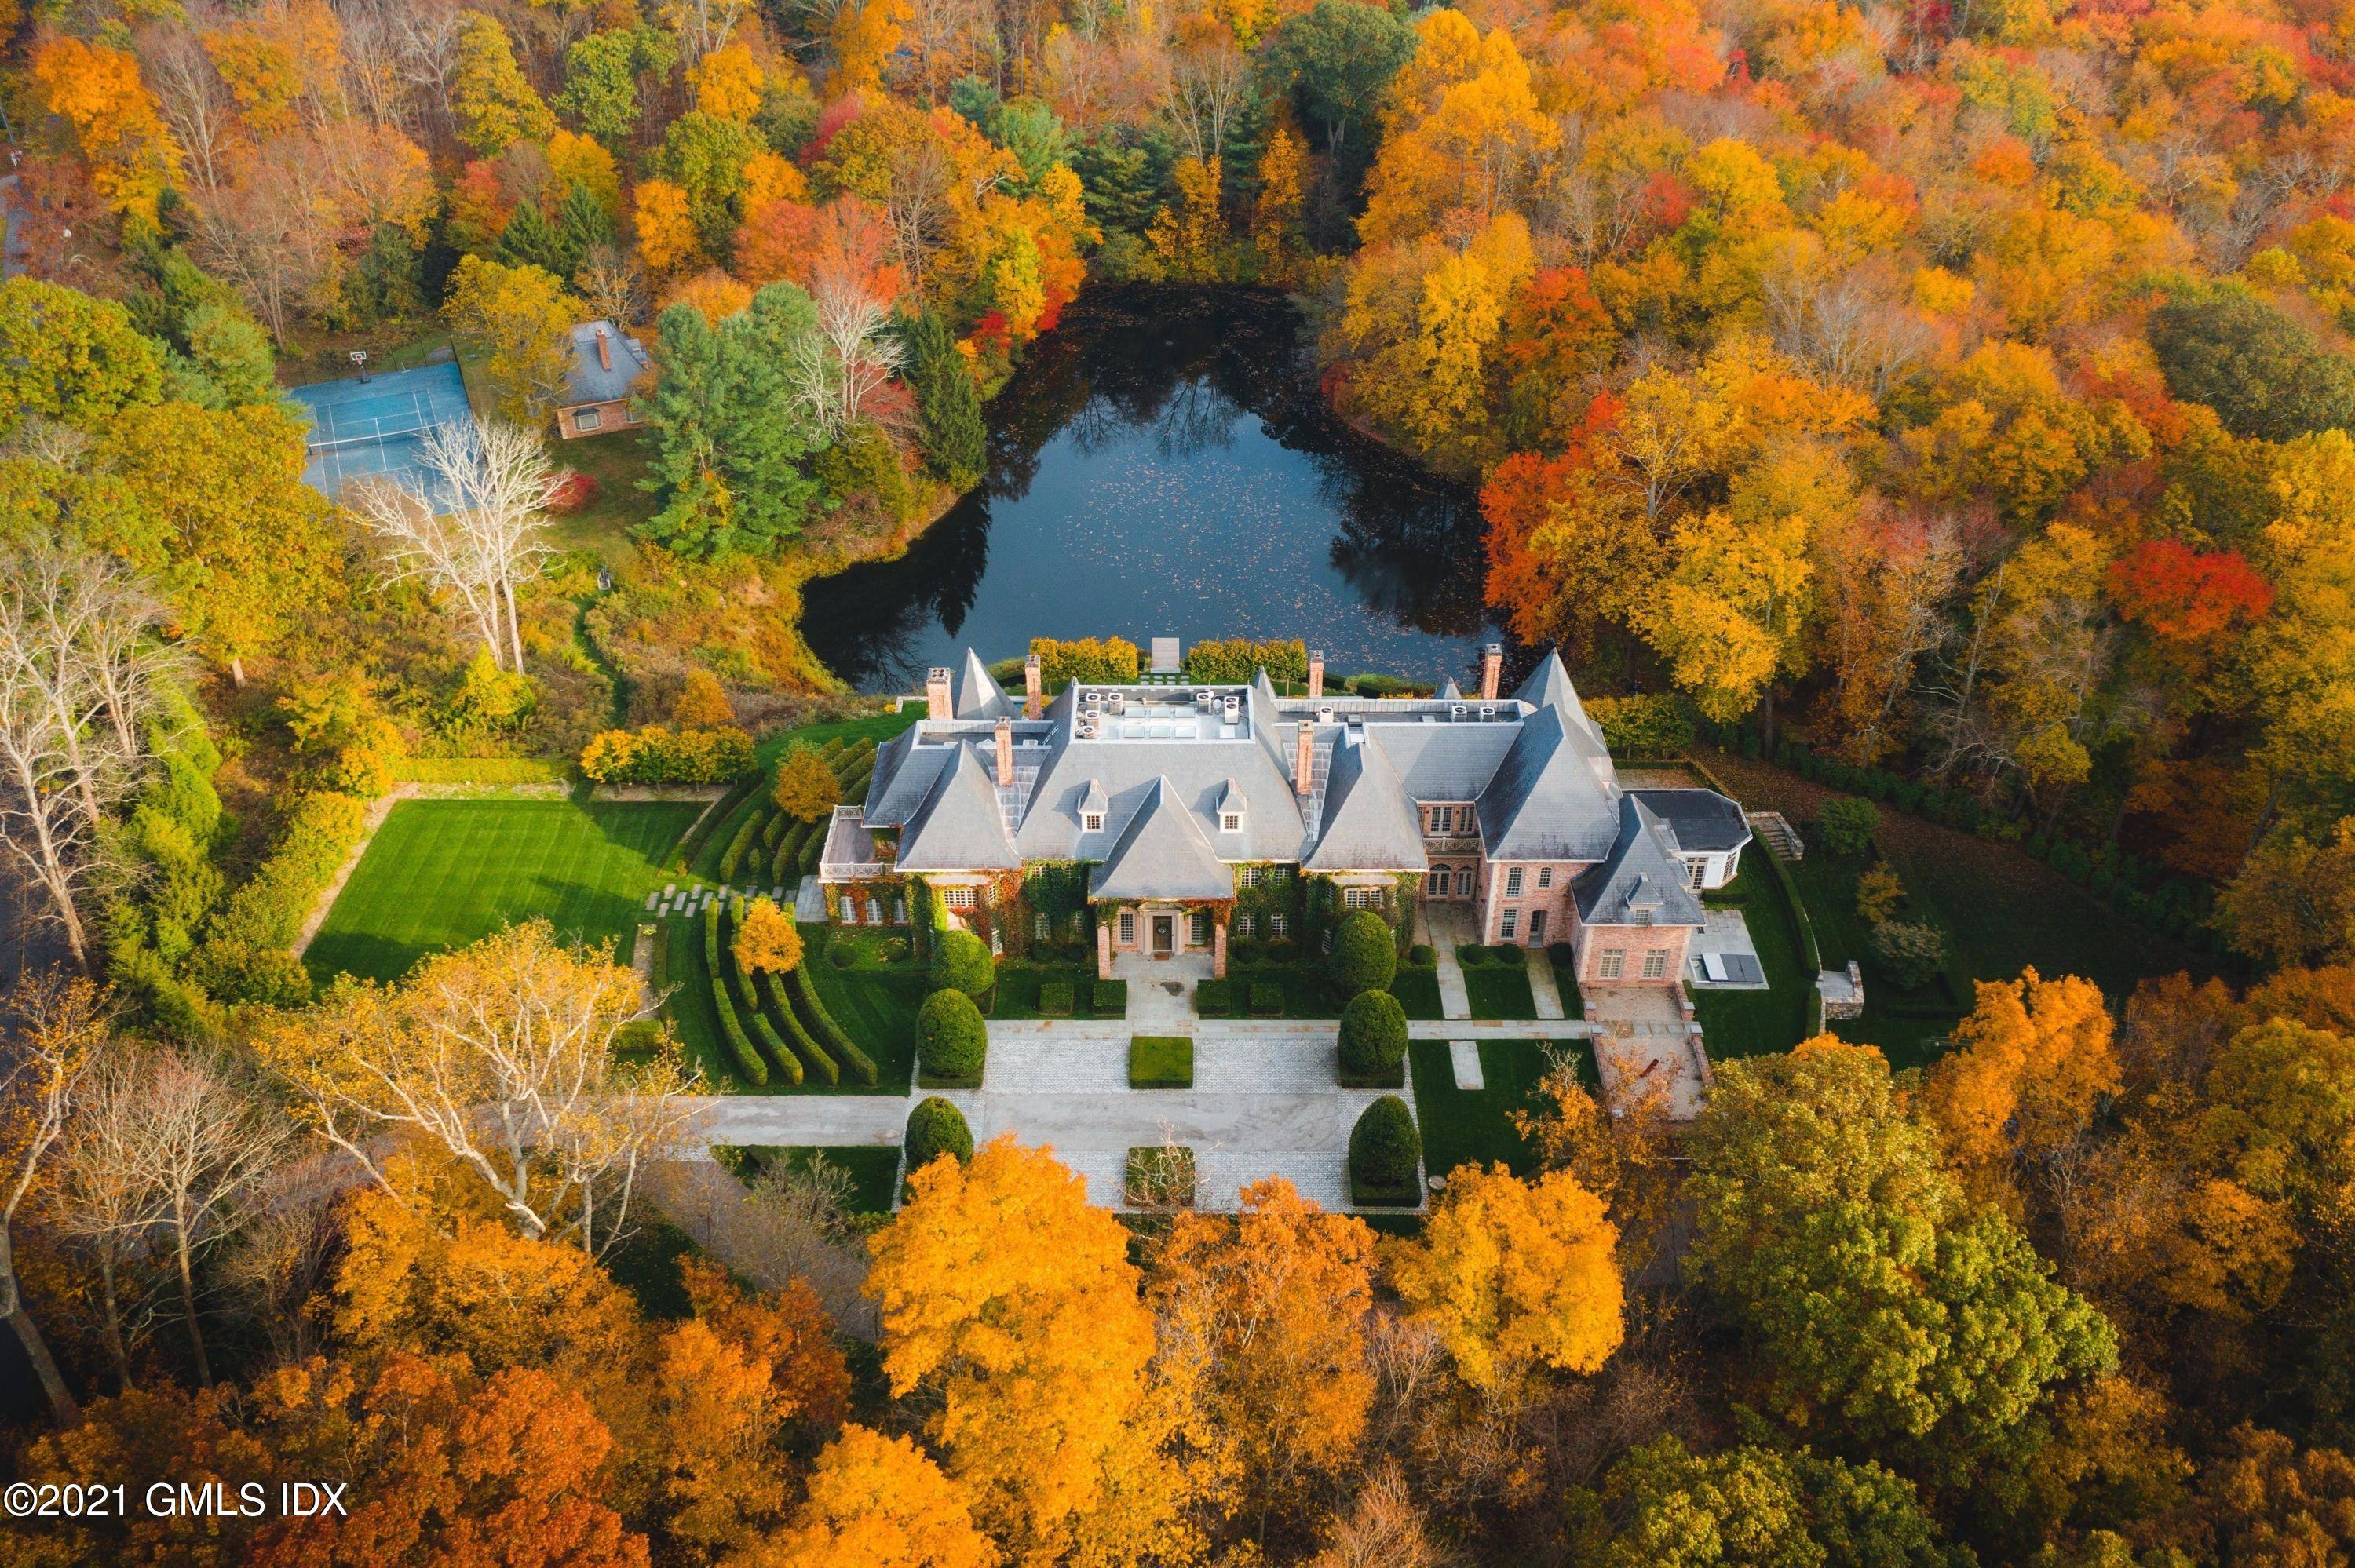 European style brick chateau offering 18, 000 SF sits on 6 acres in a superb location once chosen by Eliot Noyes.